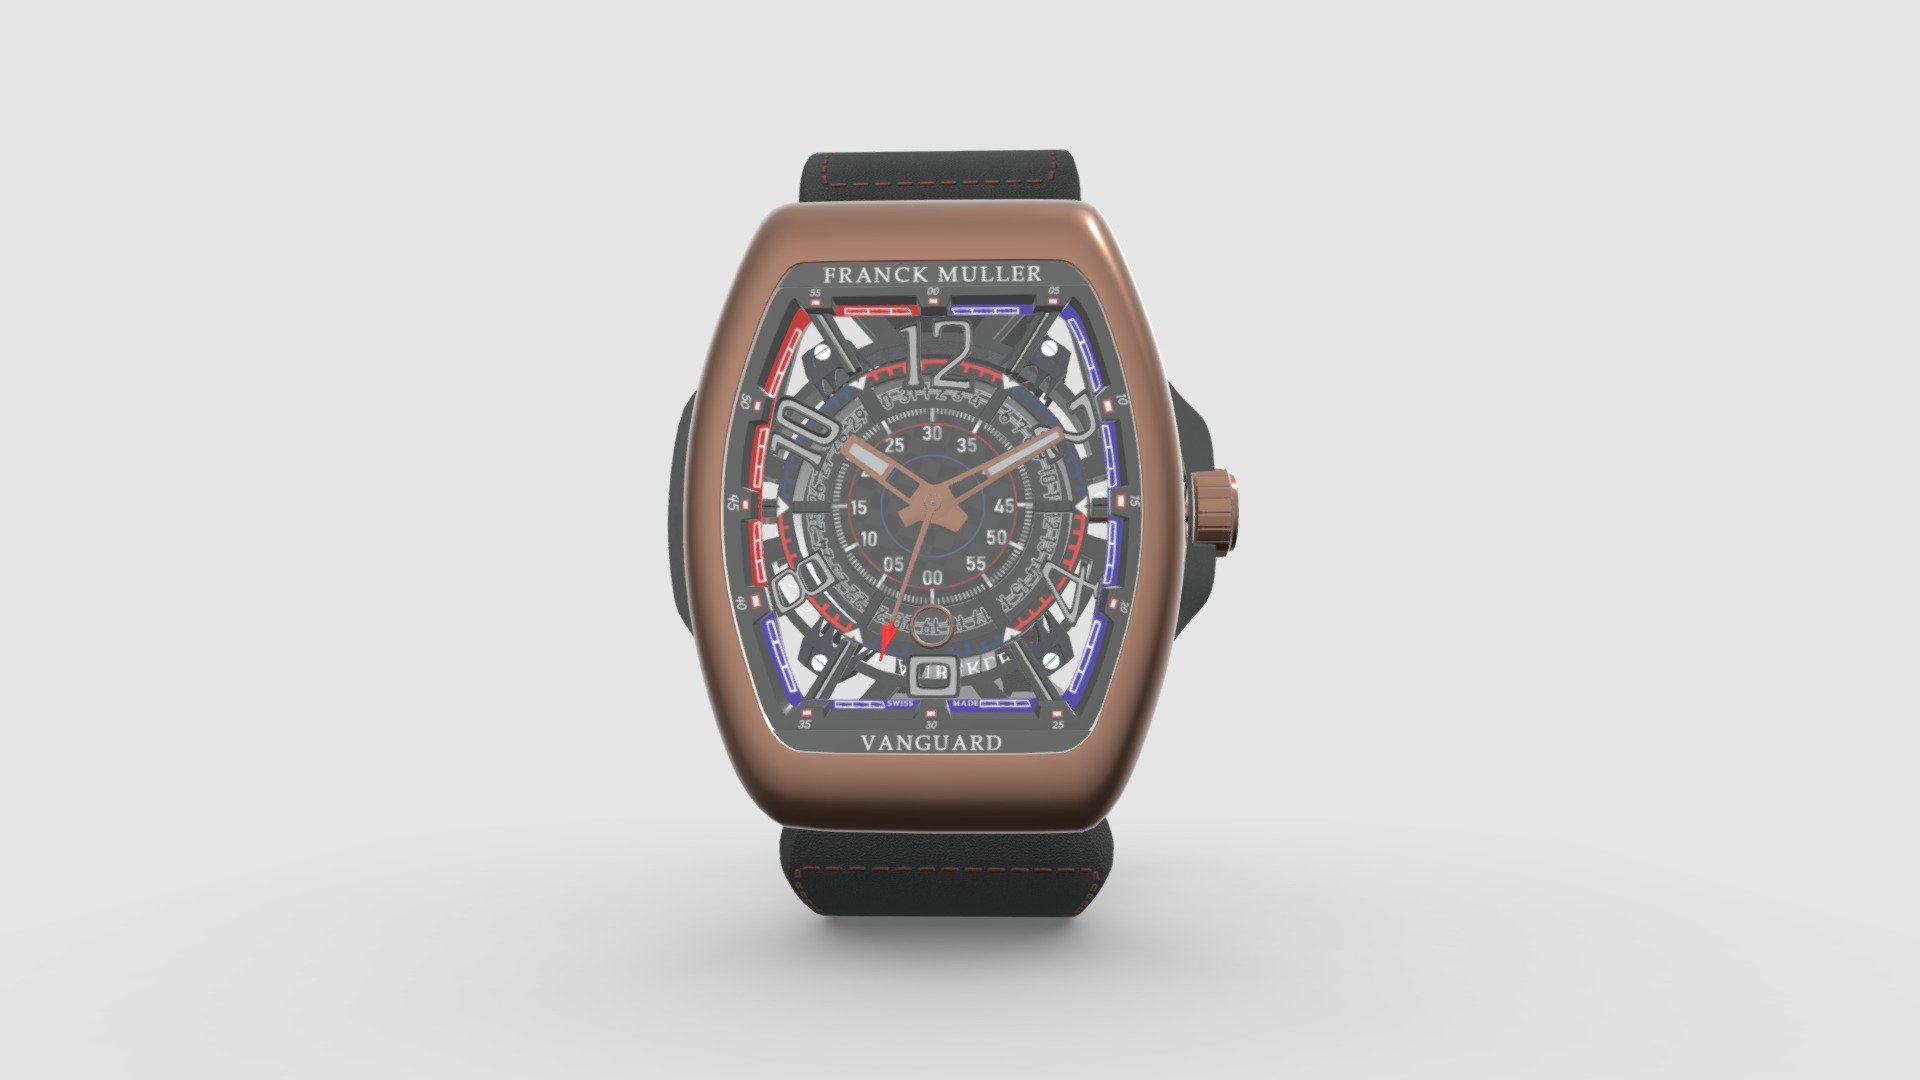 Check out this high quality low-poly 3D model of Franck Muller Vanguard. 

For your 3D modelling requirements or if you wish to purchase this model, connect with us at info@shinobu3d.com.

We offer premium quality low poly 3D assets/models for AR/VR applications, 3D visualisations, 3D product configurators, 3D printing &amp; 3D animations.

Visit https://www.shinobu3d.com for more on us 3d model